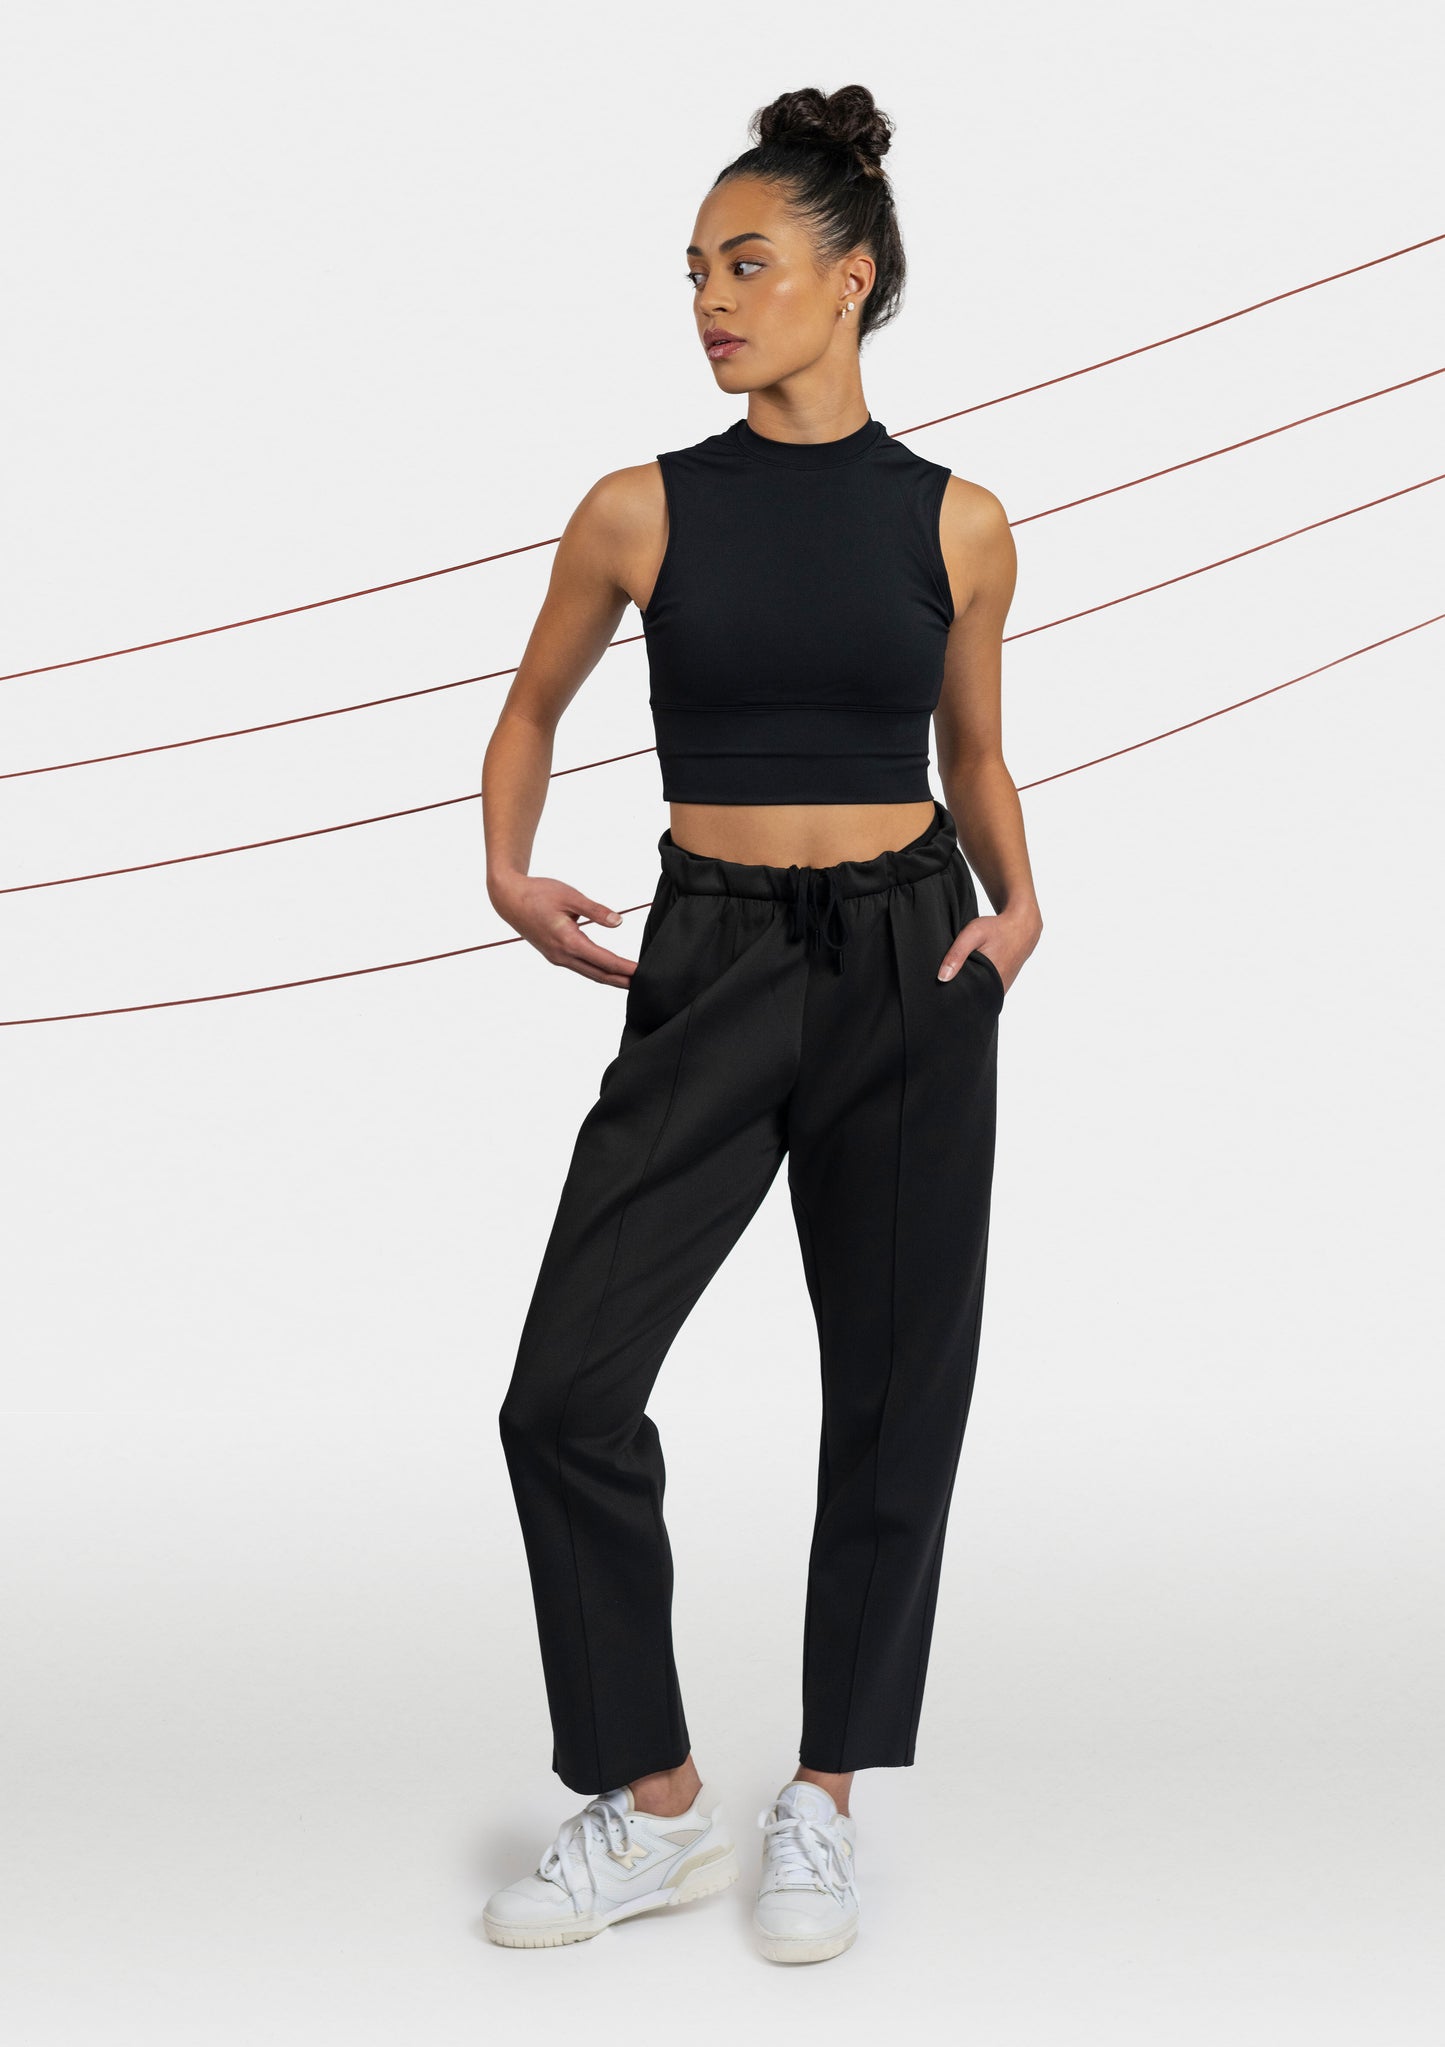 womens black cropped athleisure pants front 2